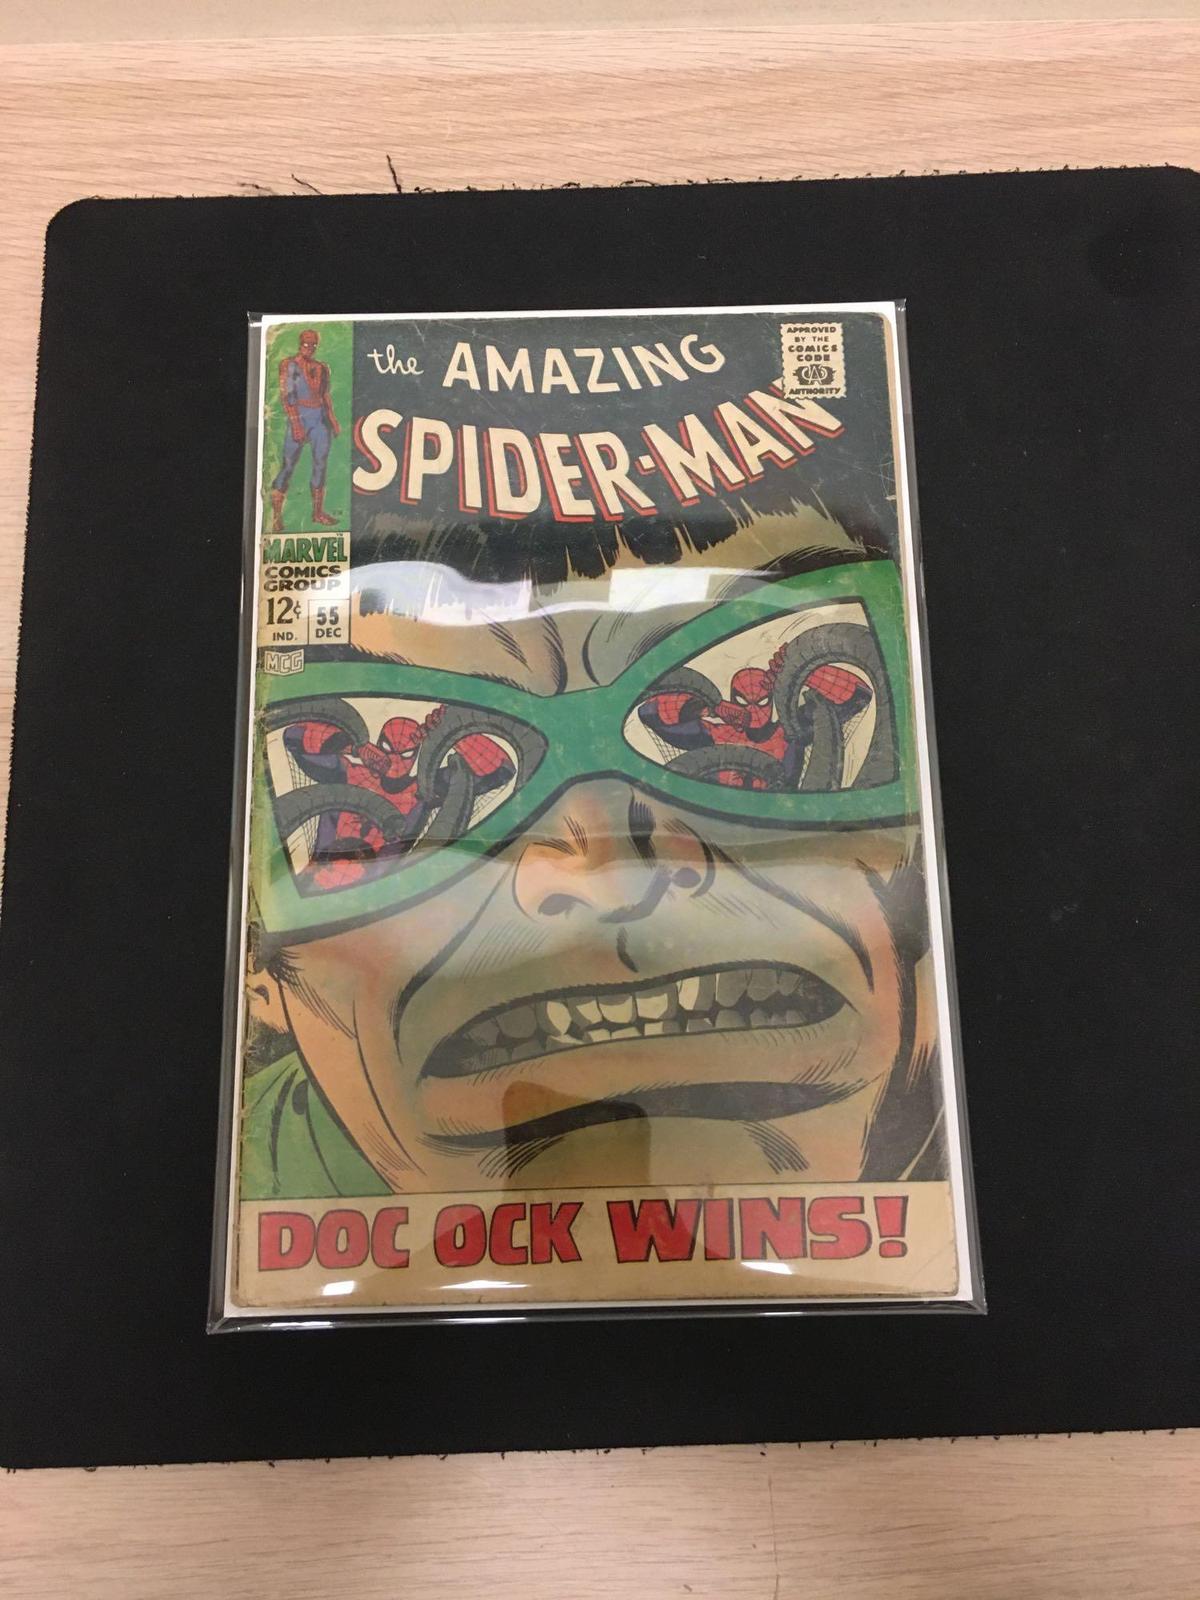 The Amazing Spider-Man #55 Comic Book from Estate Collection